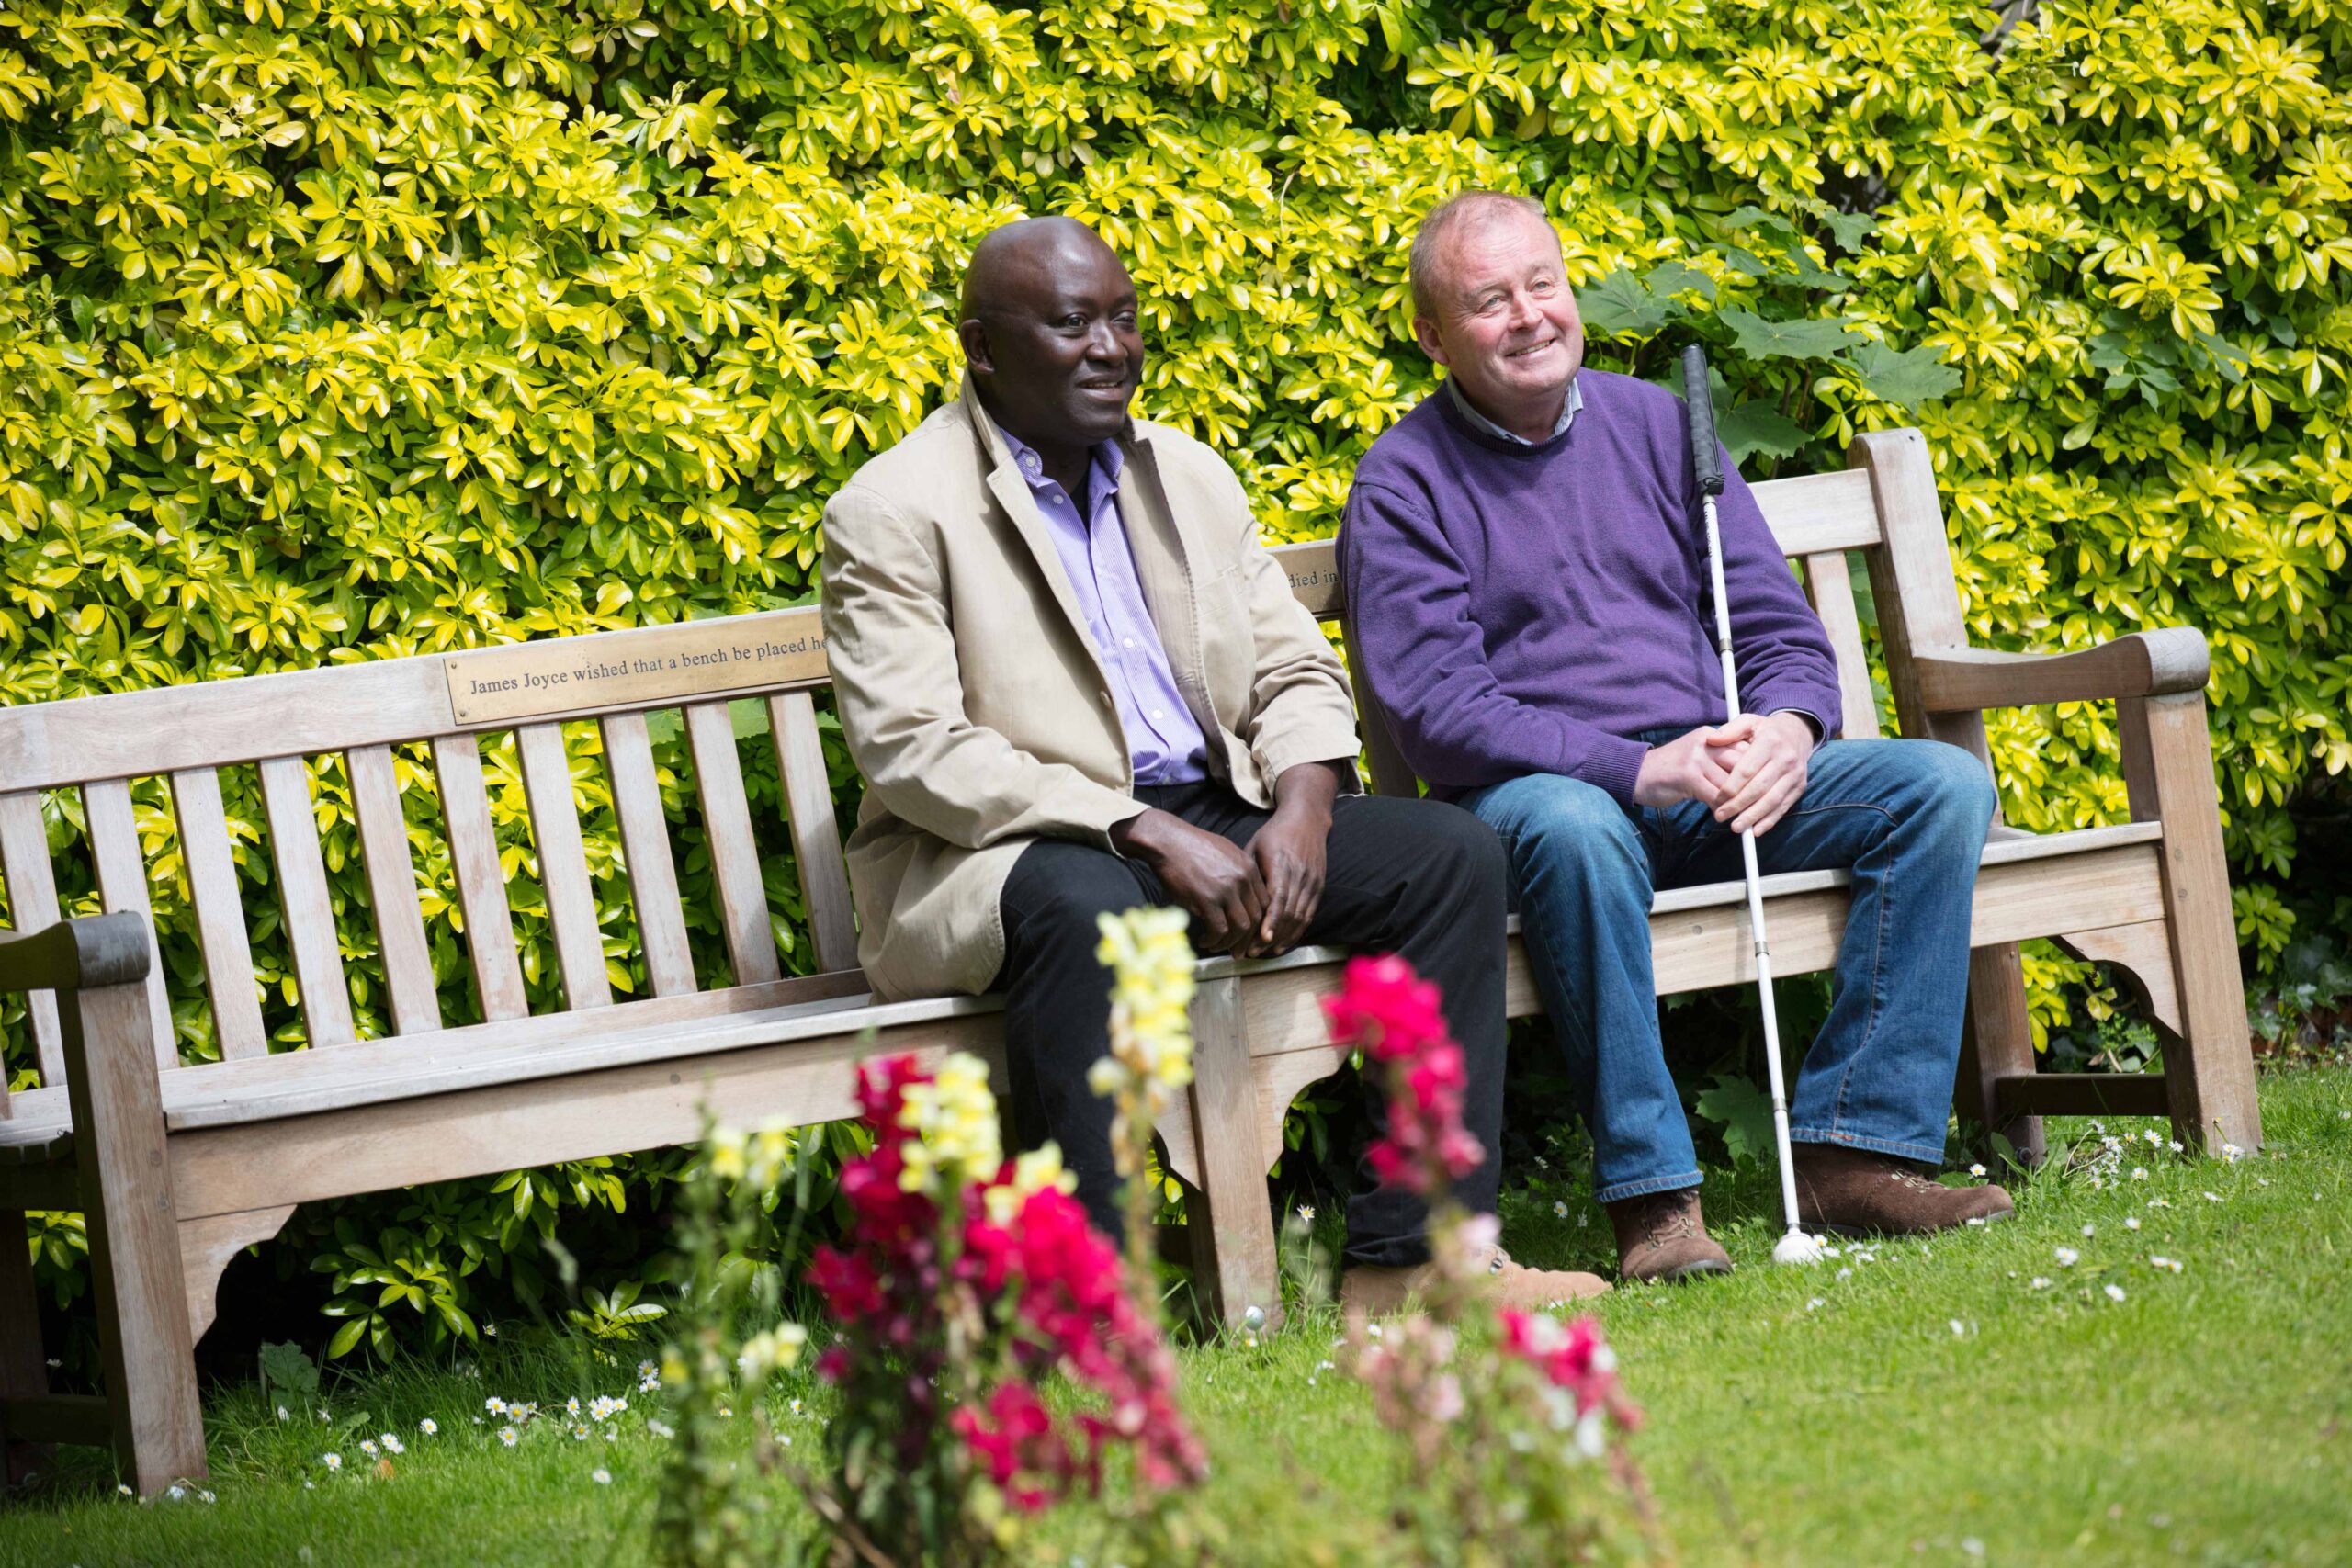 Two men are sitting on a bench in a bright green garden. One of the men is holding a symbol cane and both of them are smiling.